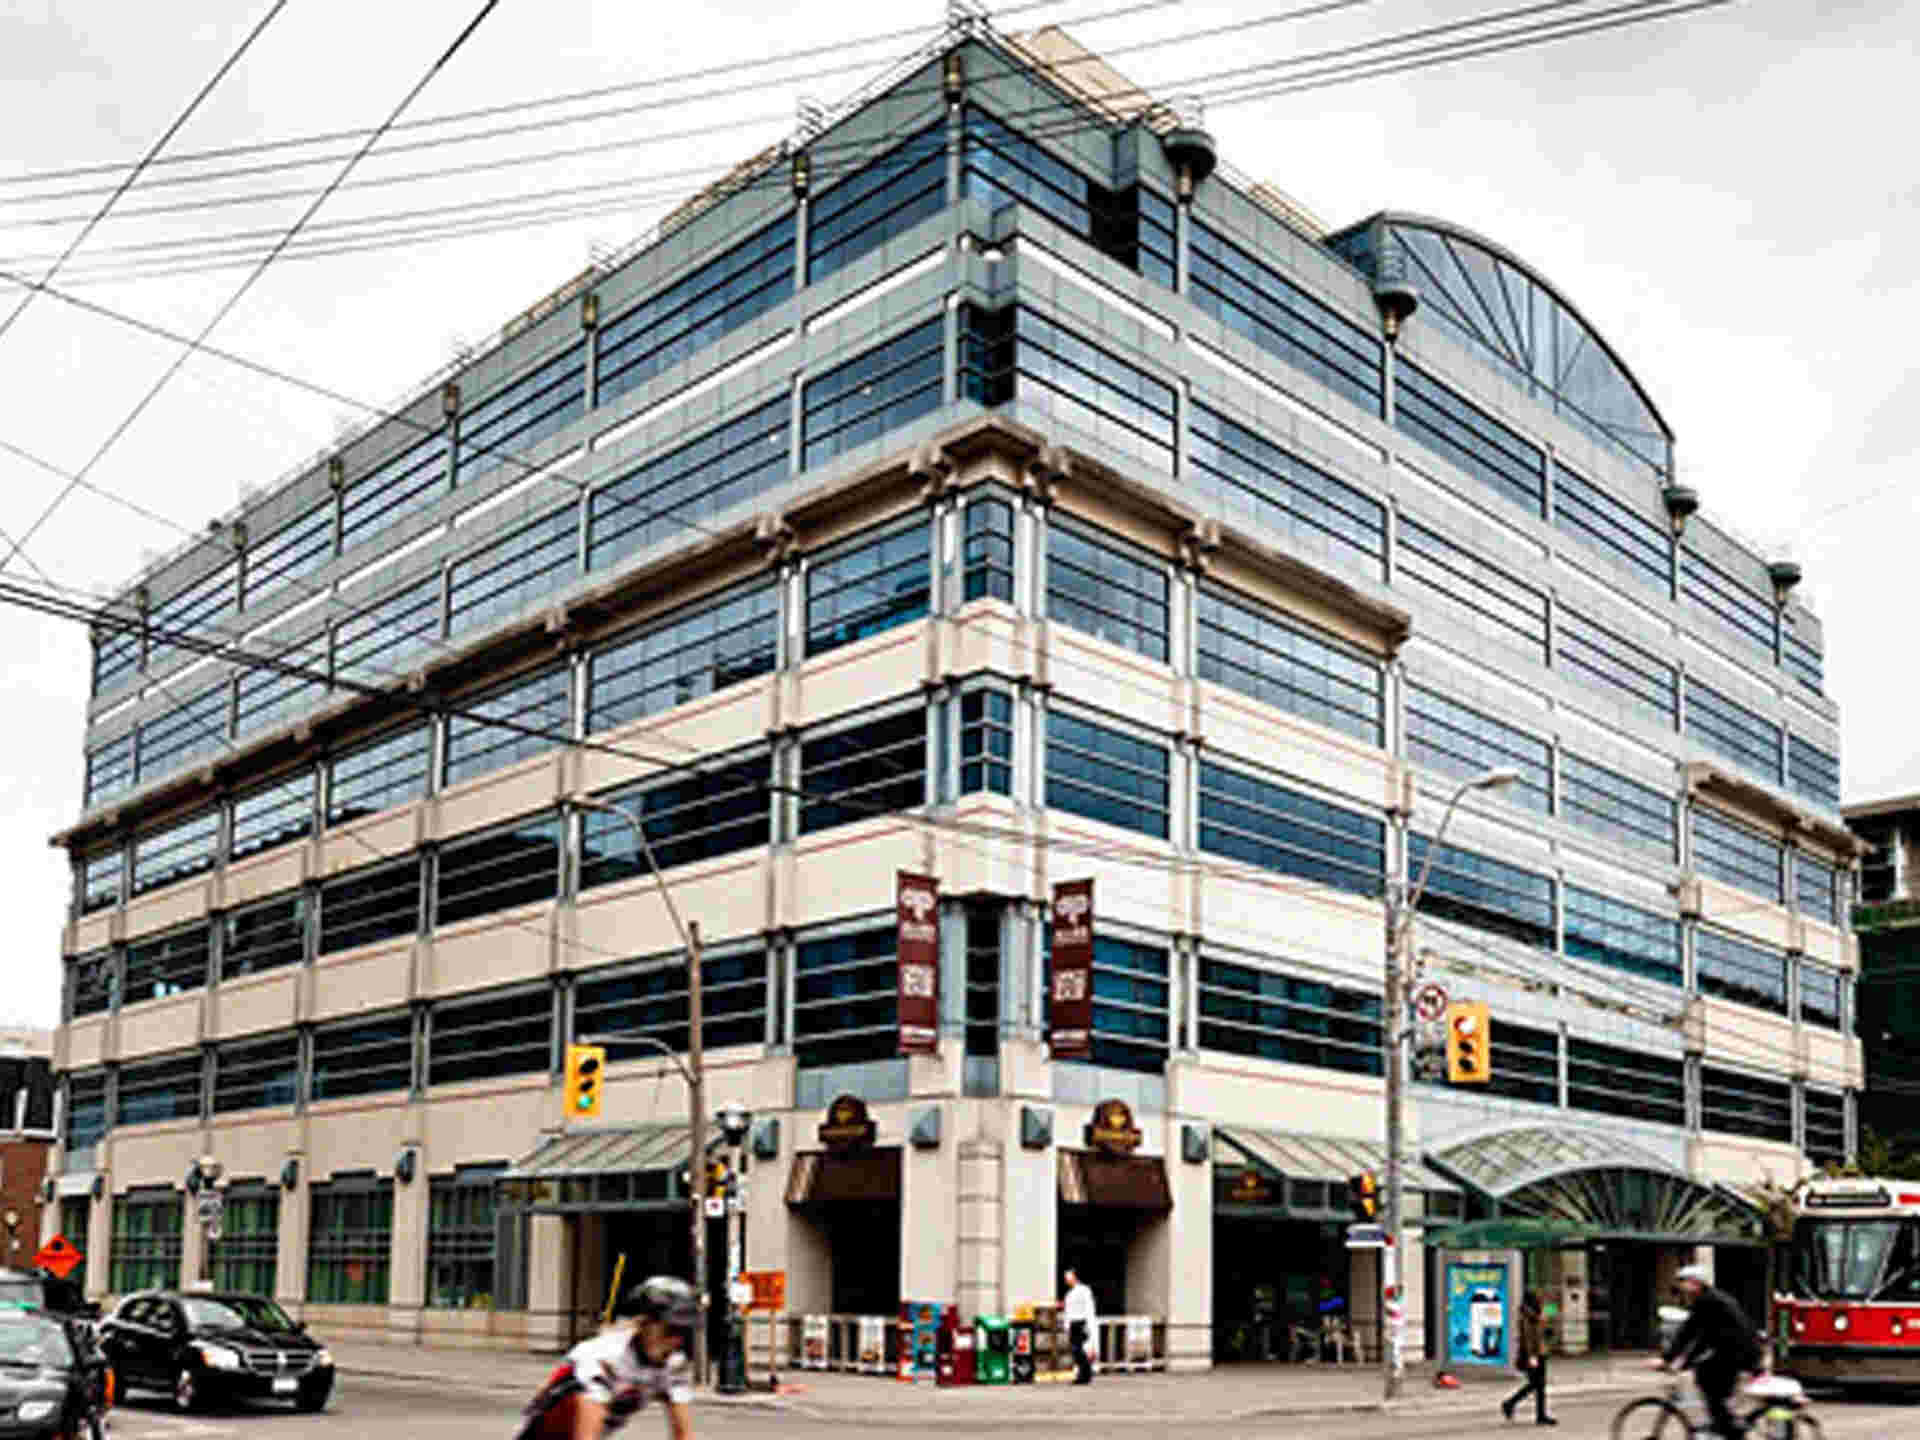 905 King Street W – Office - 905-king-w-exterior-shot-streetview-featured